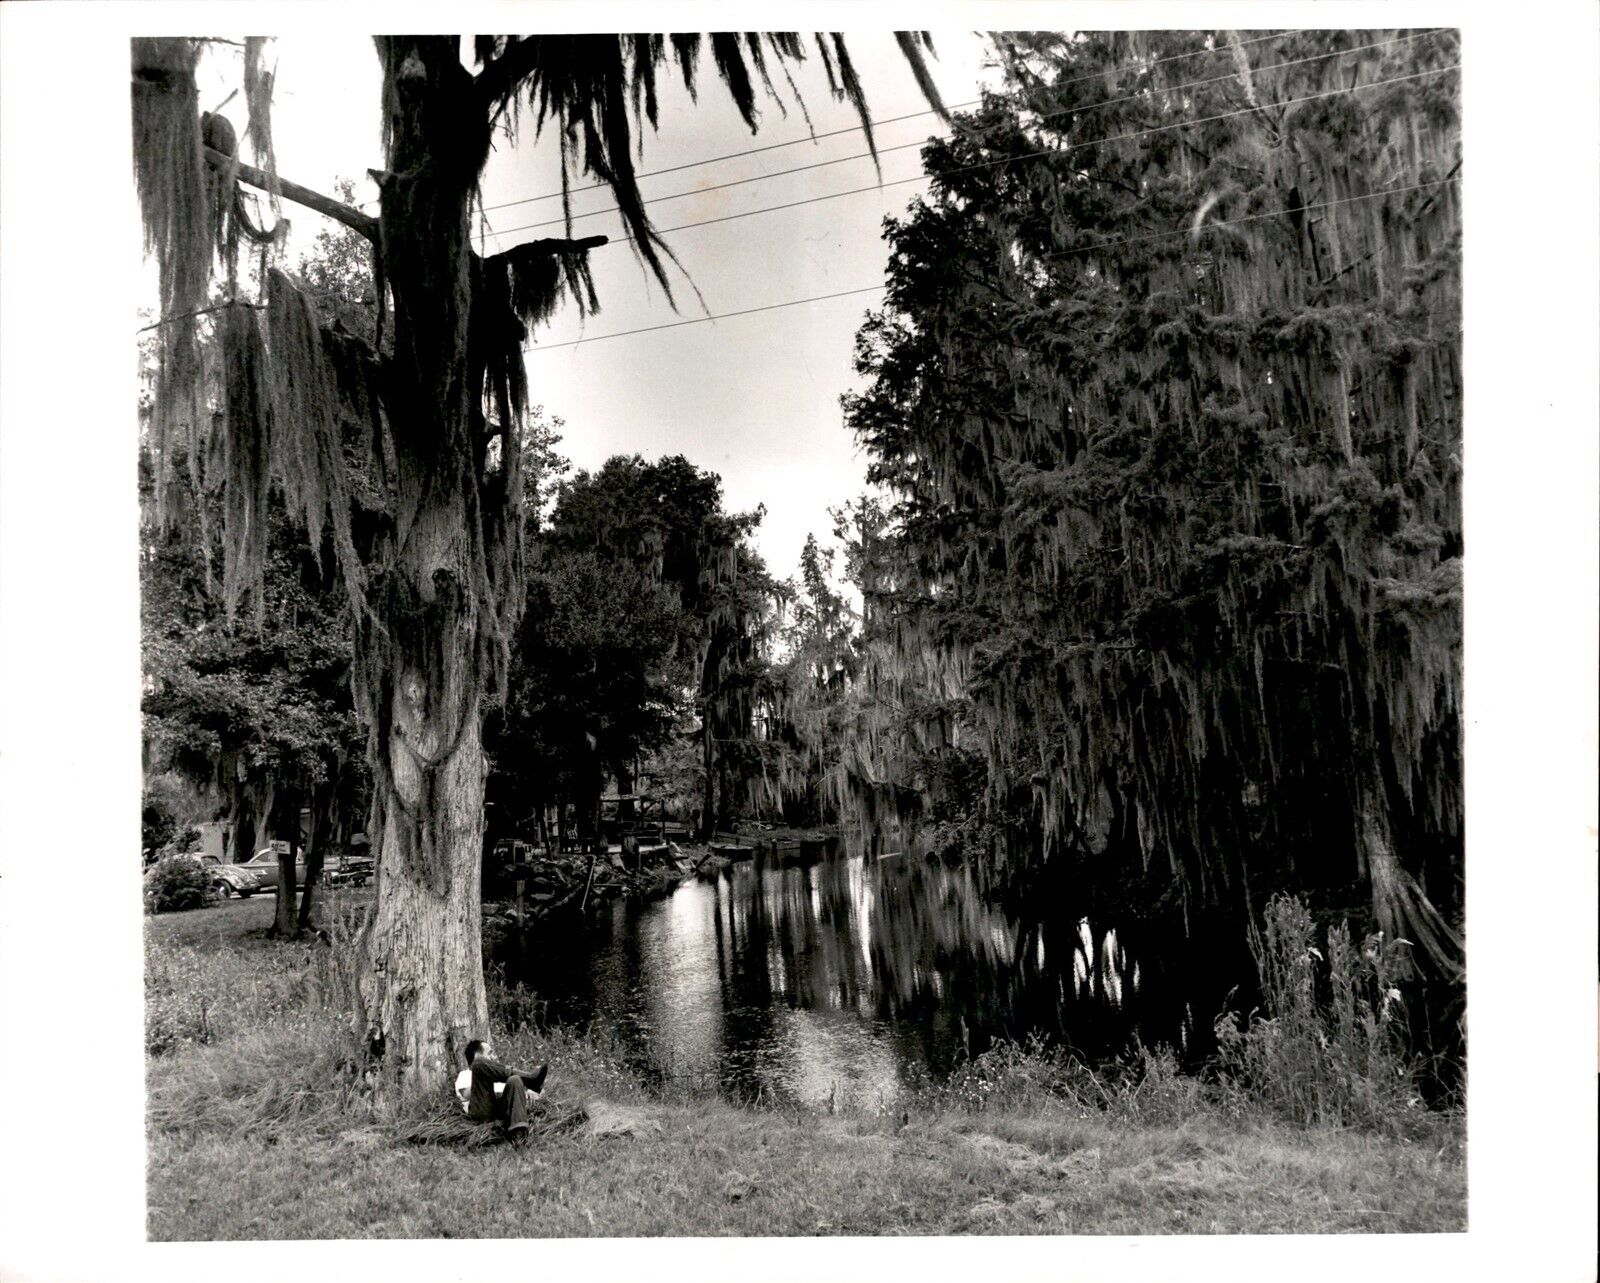 LG53 1963 Orig Doug Kennedy Photo SPANISH MOSS HANGING FROM TREES GAINESVILLE